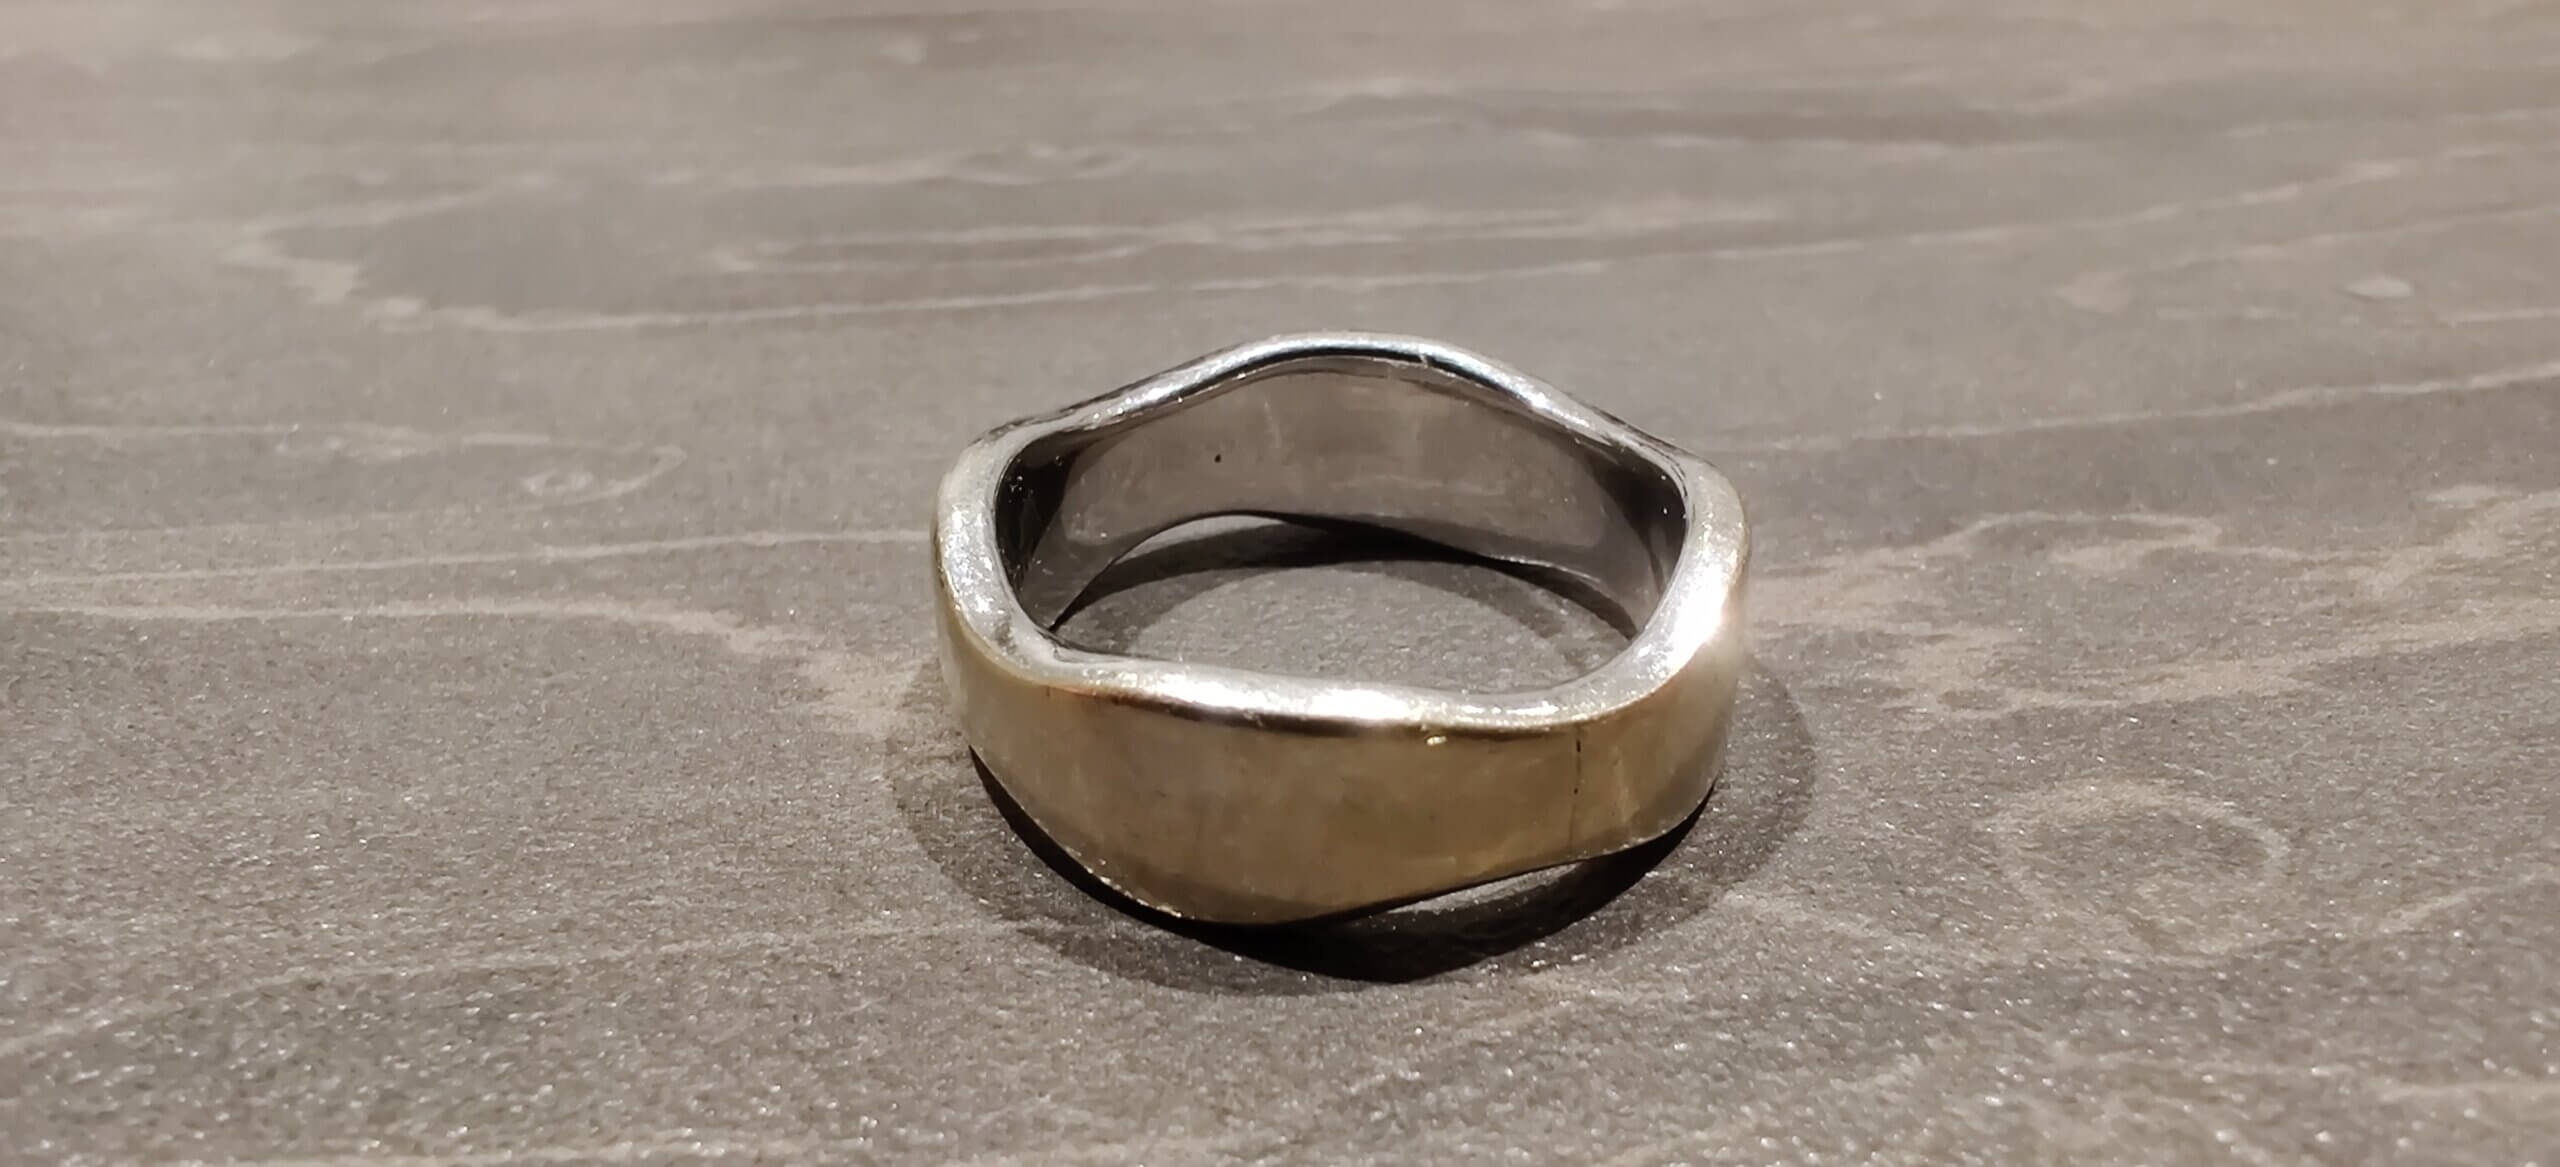 Remaking a Ring - How Much Does it Cost? Re-Modelling a Ring